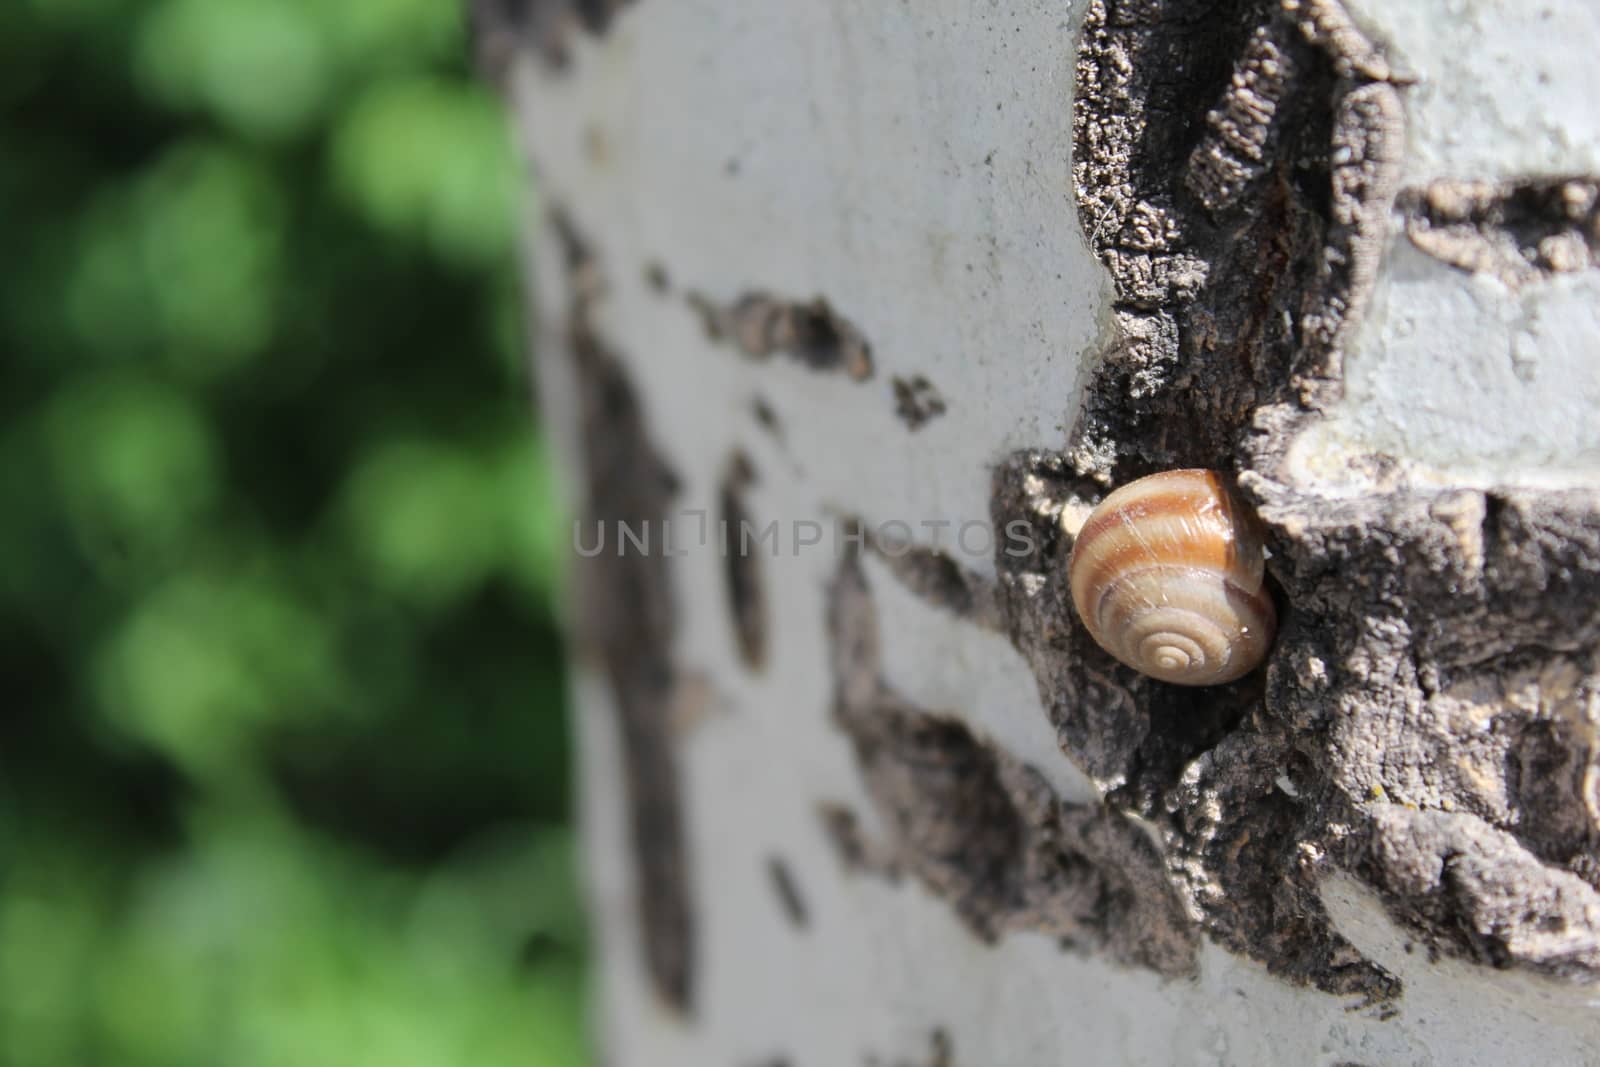 Snail hidden in his shell in the trunk of a tree.